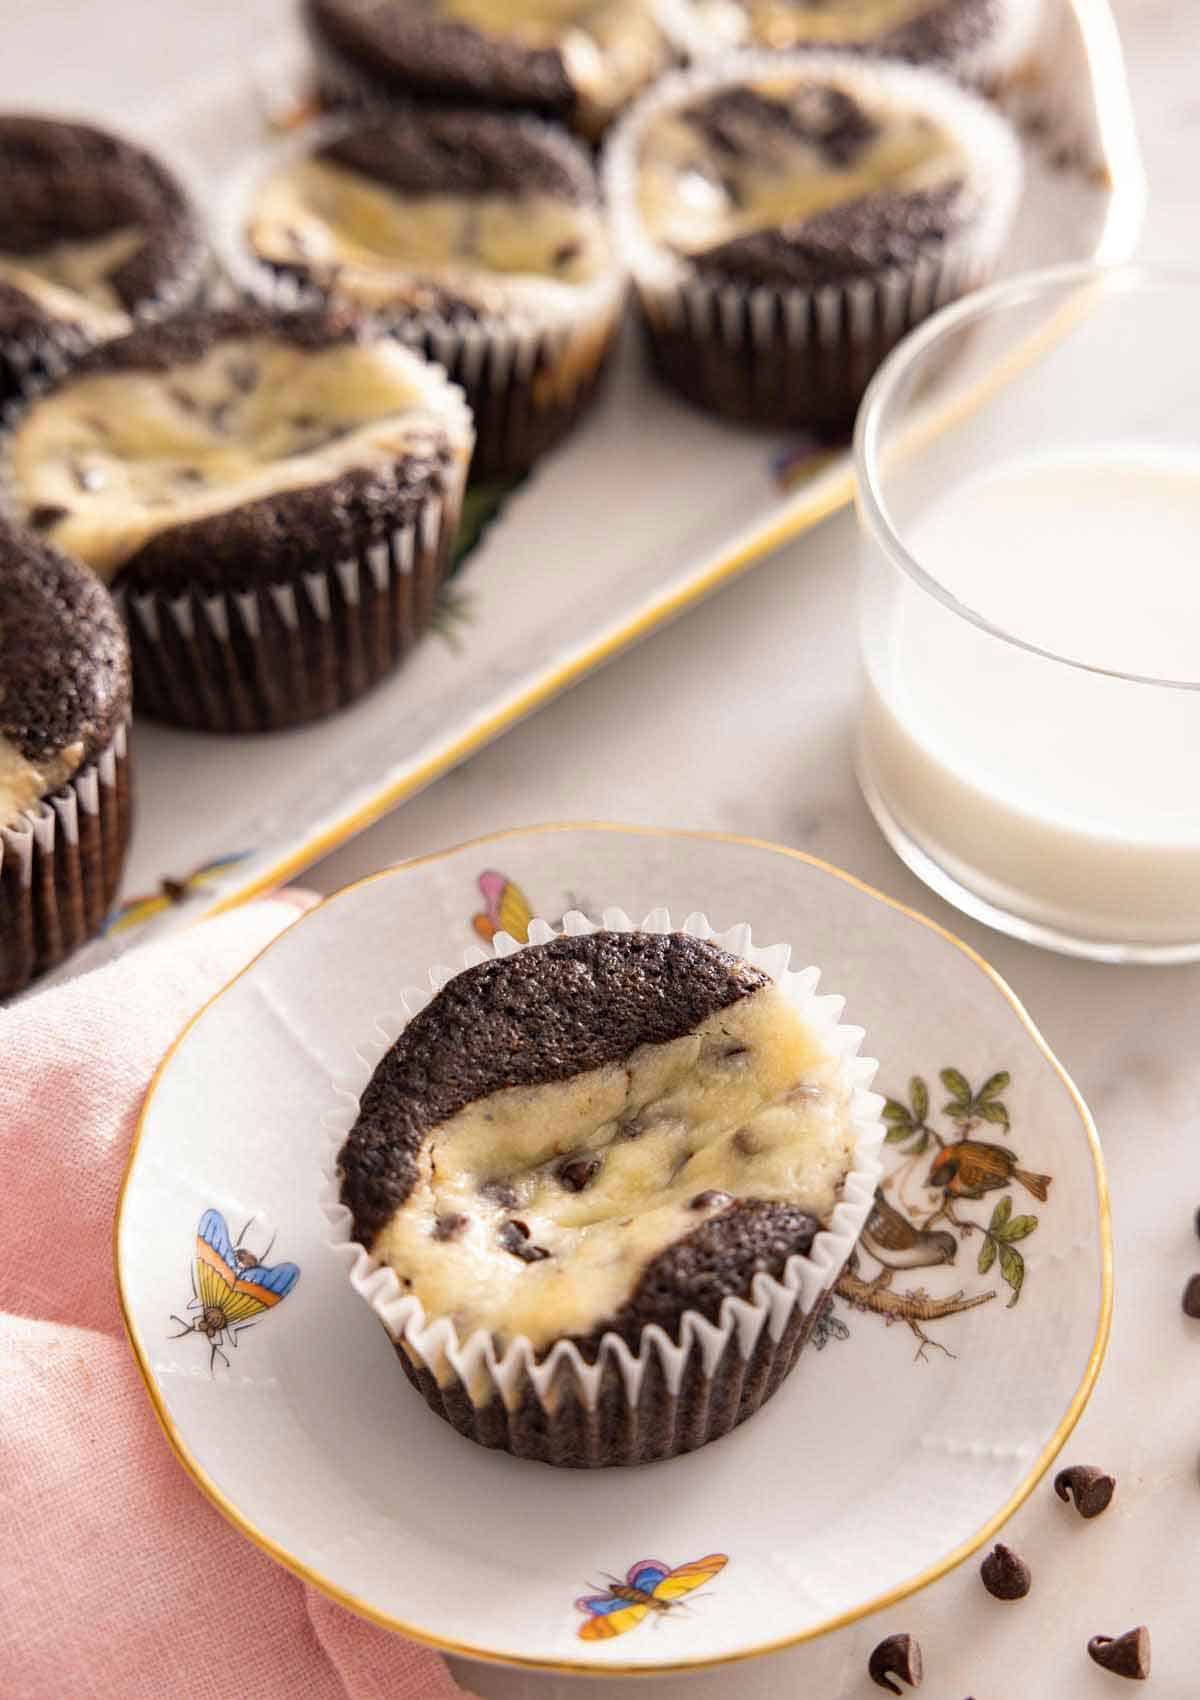 A plate with a black bottom cupcakes by a cup of milk and a platter of more cupcakes.